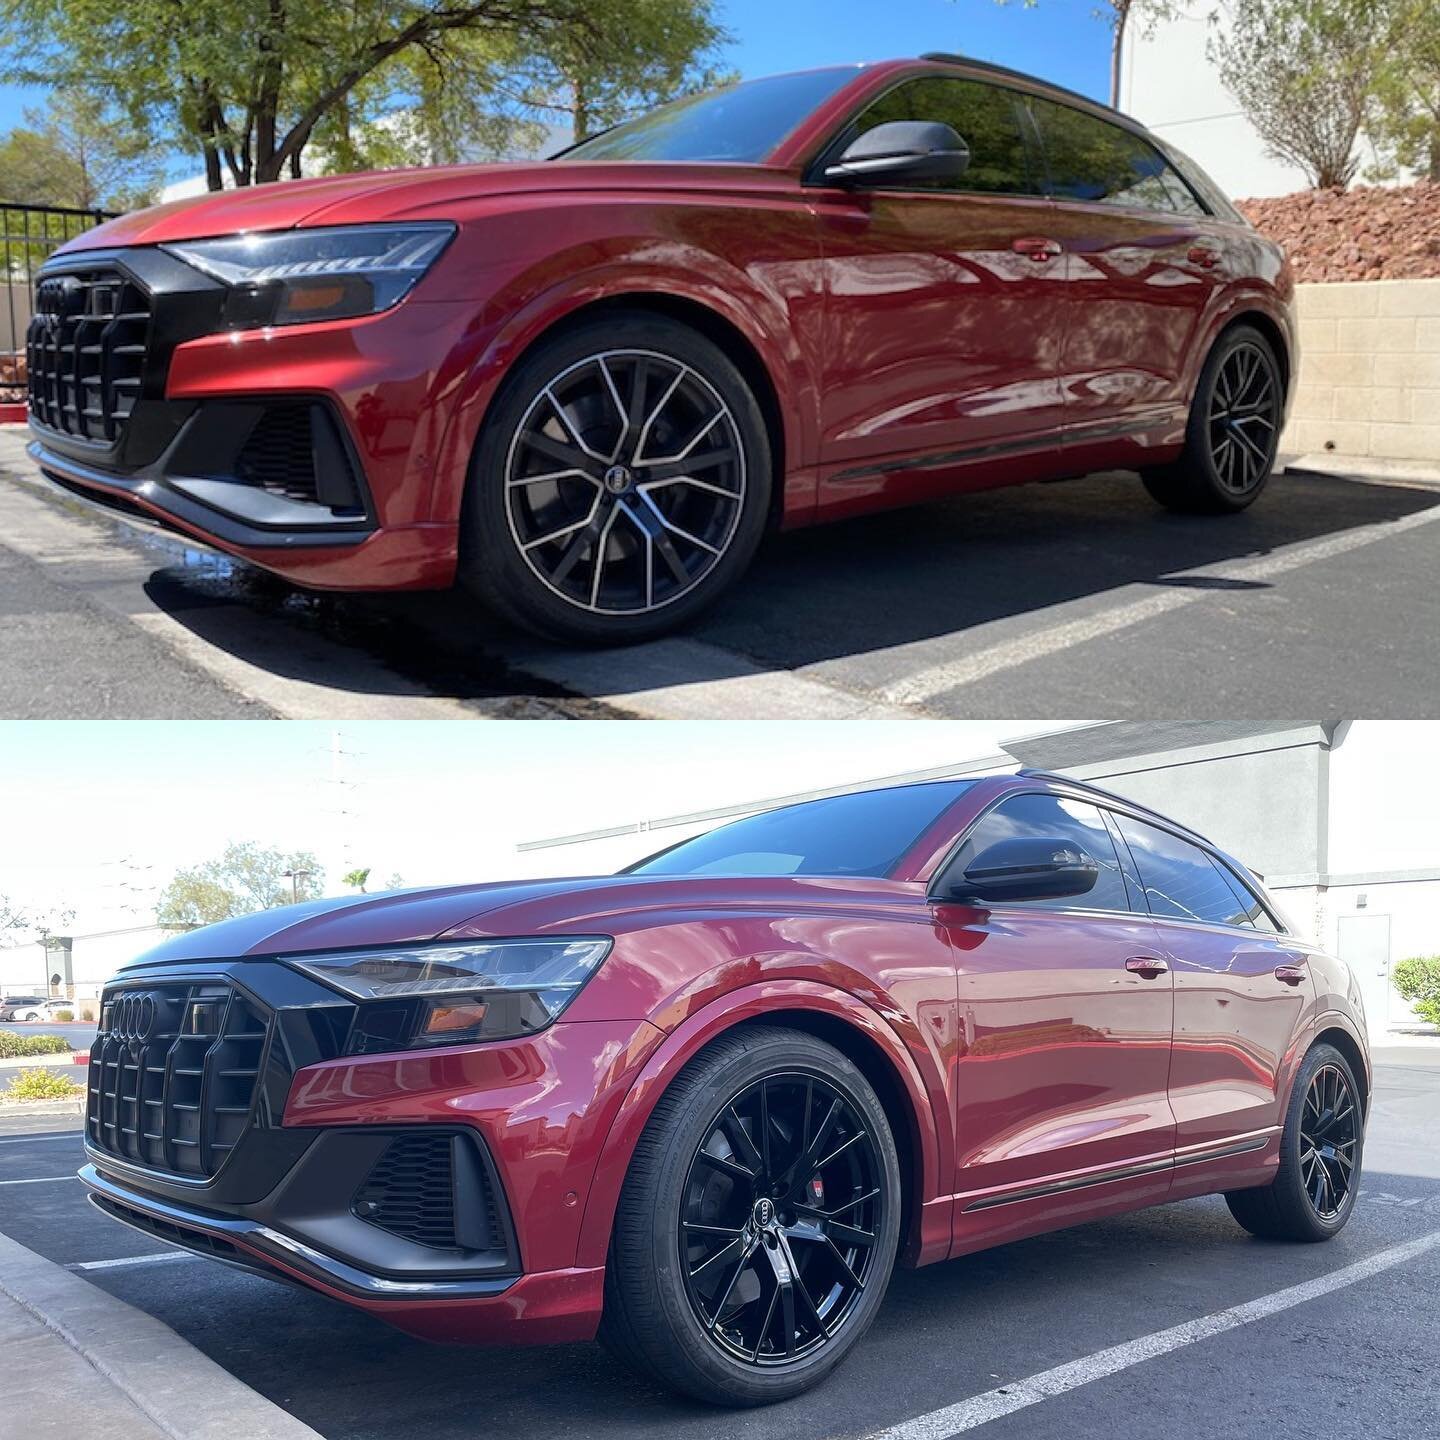 Before ⬇️ After
Powder coated wheels gloss black on this Audi SQ8 🔥🔥